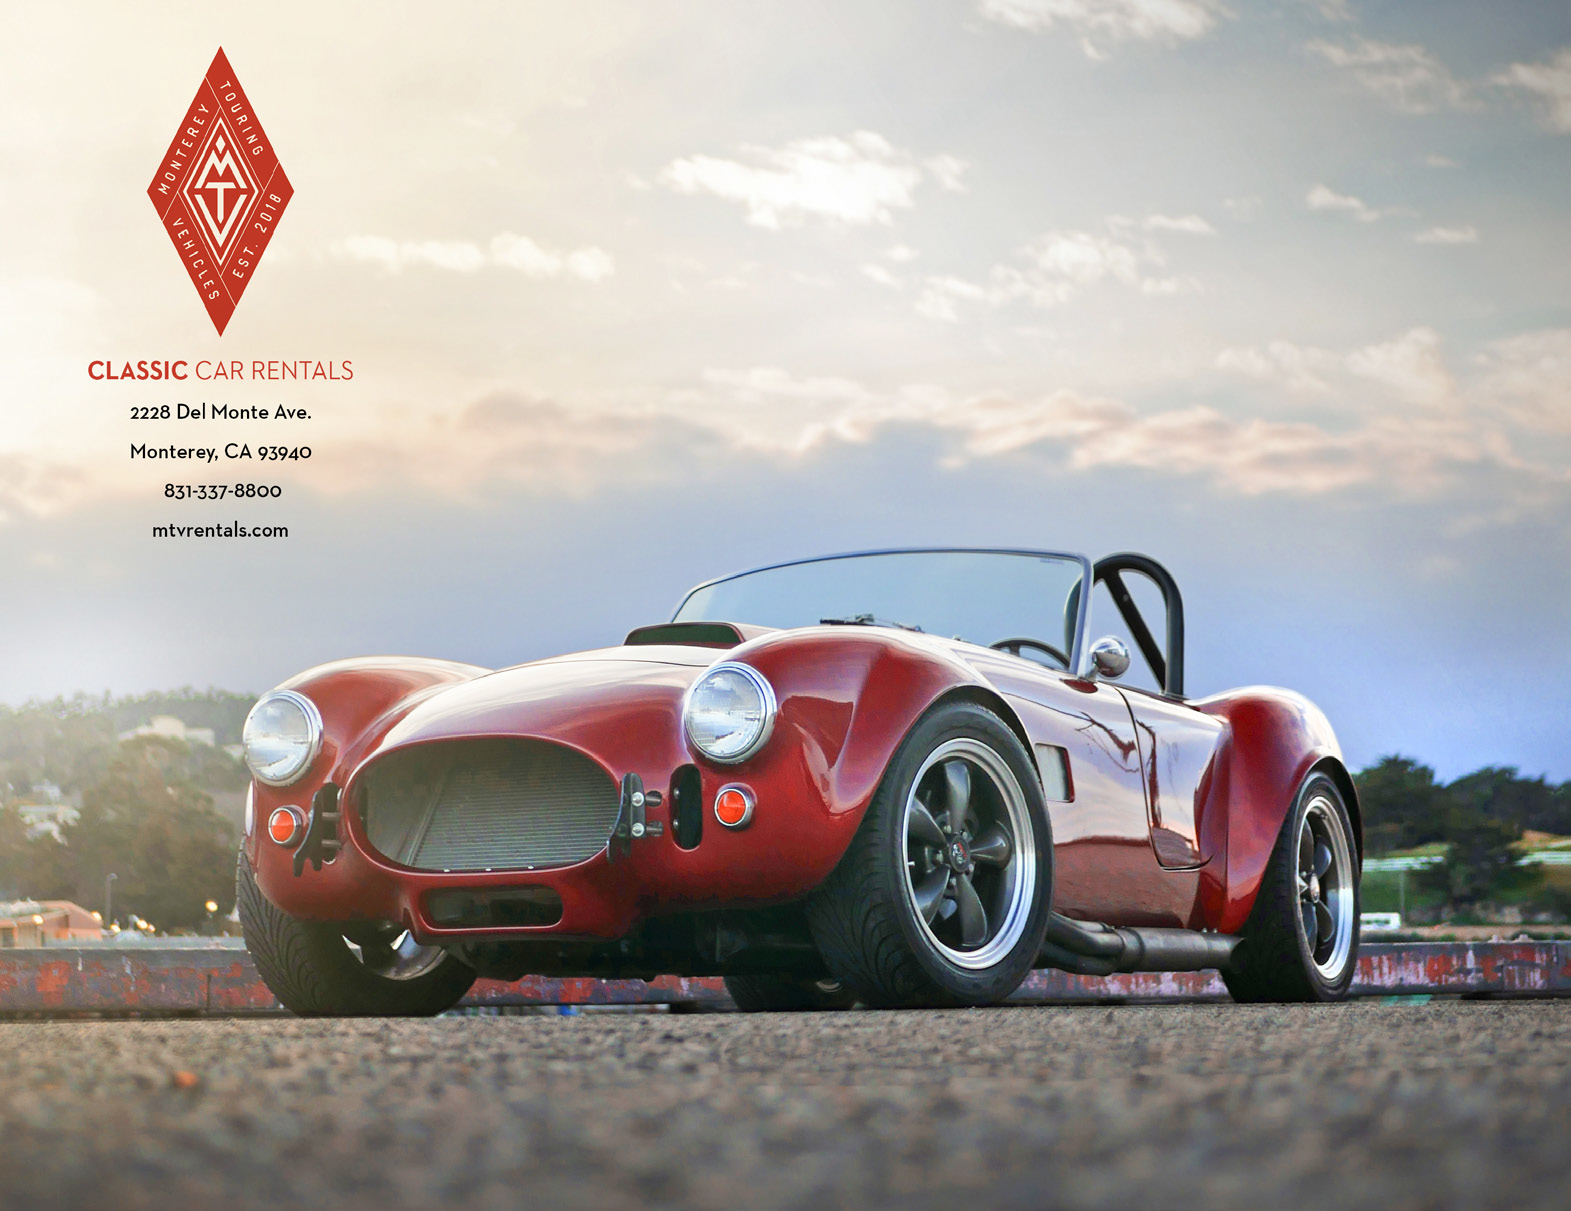 1965 Ford Shelby Cobra in 65 Degree Magazine feature